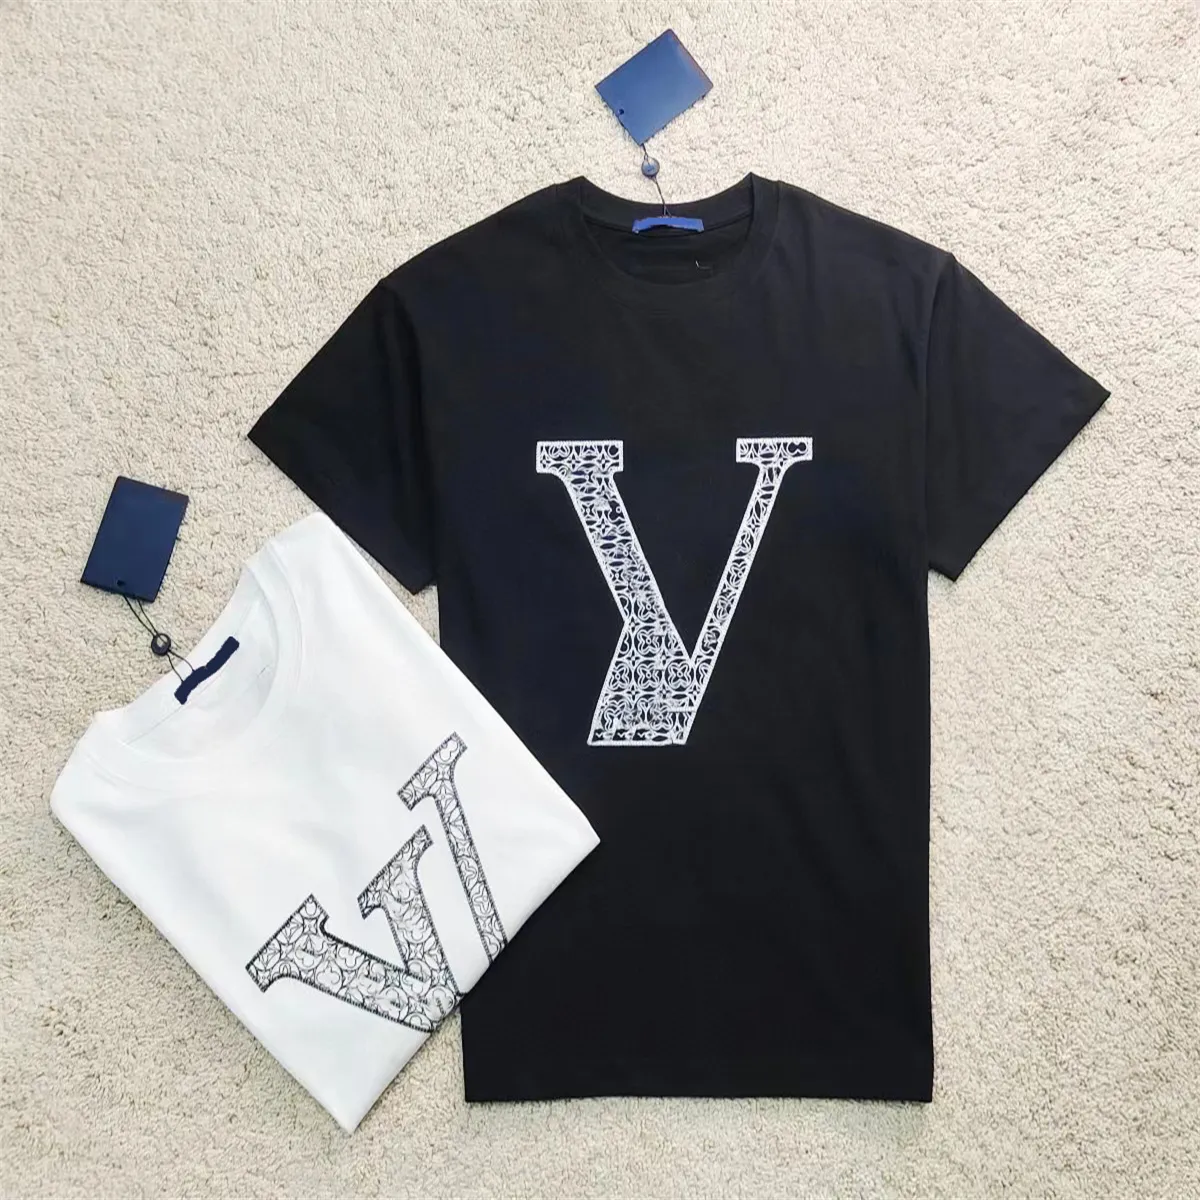 Official website Designer Summer Mens Designer T Shirt Casual Man Womens Tees With Letters Print Short Sleeves Top Sell Luxury Men284I